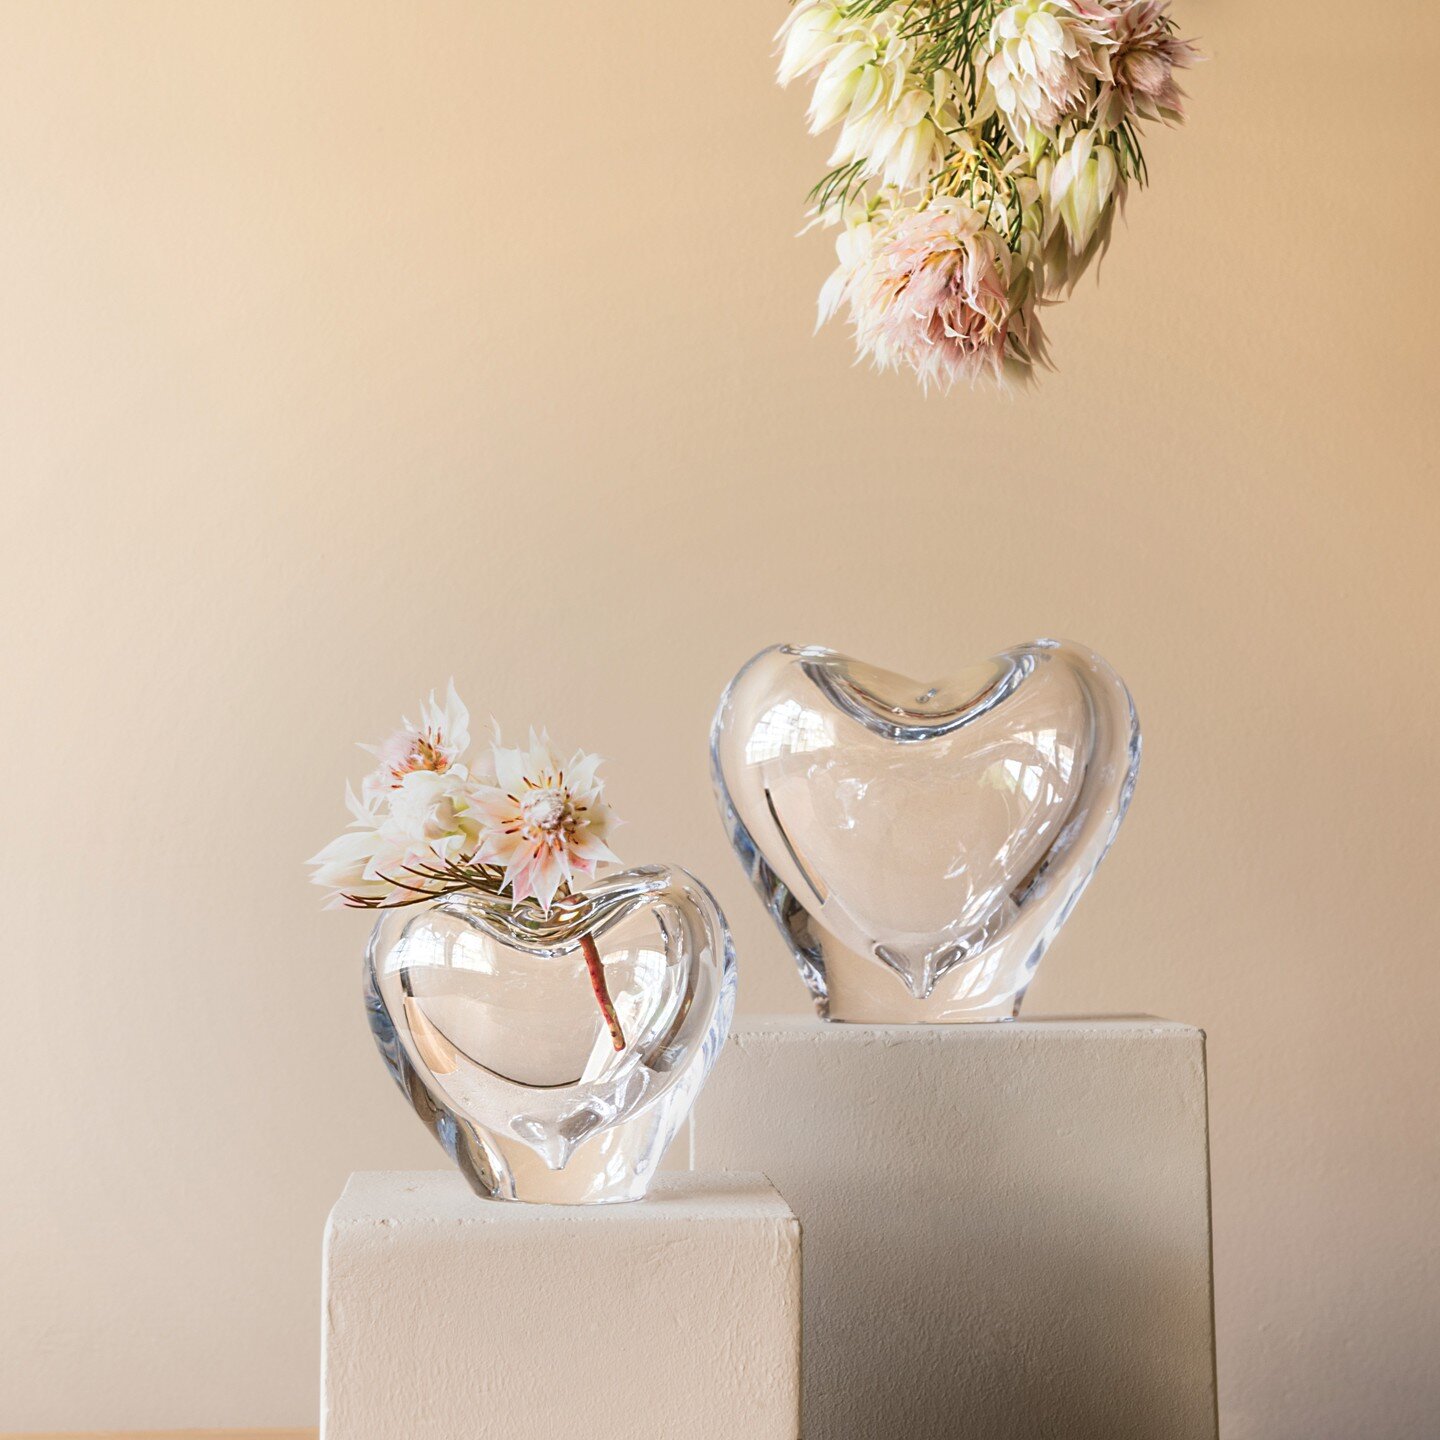 With Valentines Day around the corner are you still looking for the perfect gift for your special someone? Stop by our retail boutique and see the many heart pieces from @simonpearce we have available. We assure this will be a piece they love.